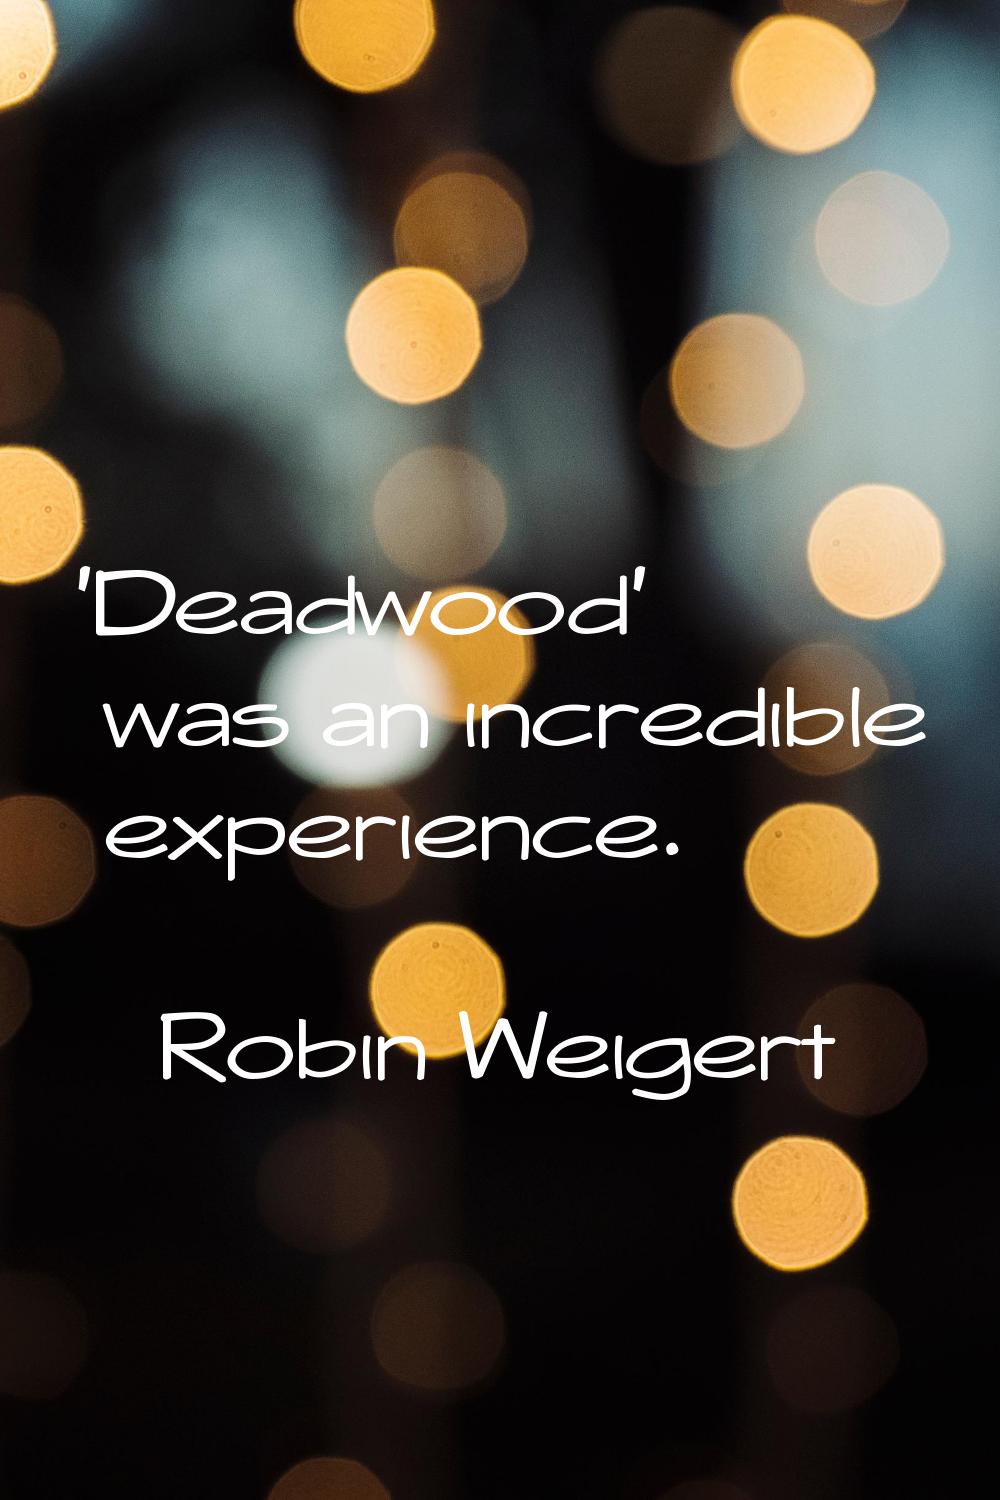 'Deadwood' was an incredible experience.